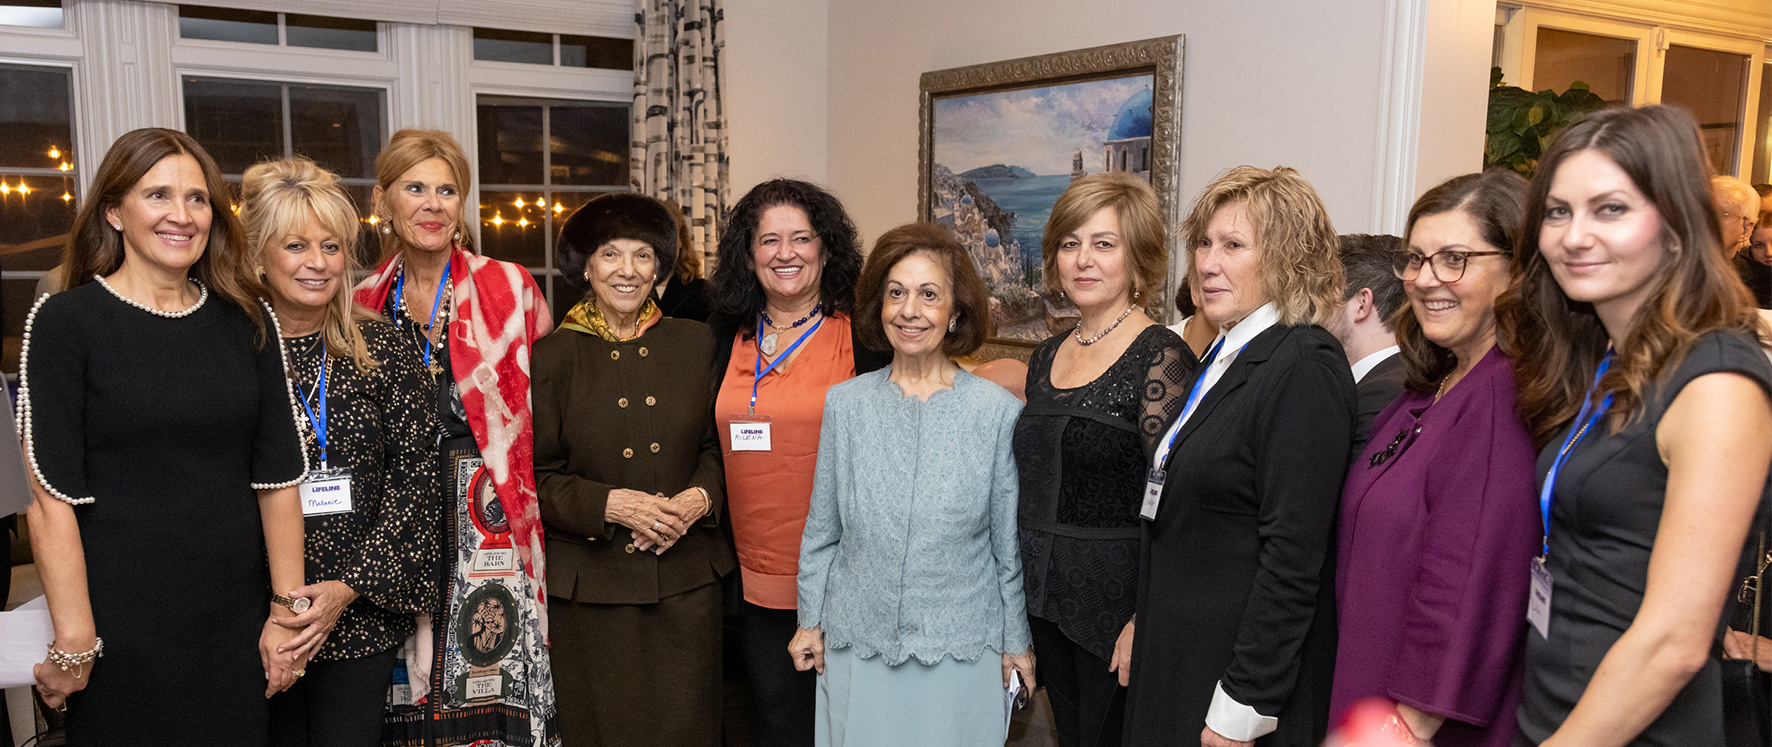 HRH Crown Princess Katherine with part of Lifeline Chicago Board Members